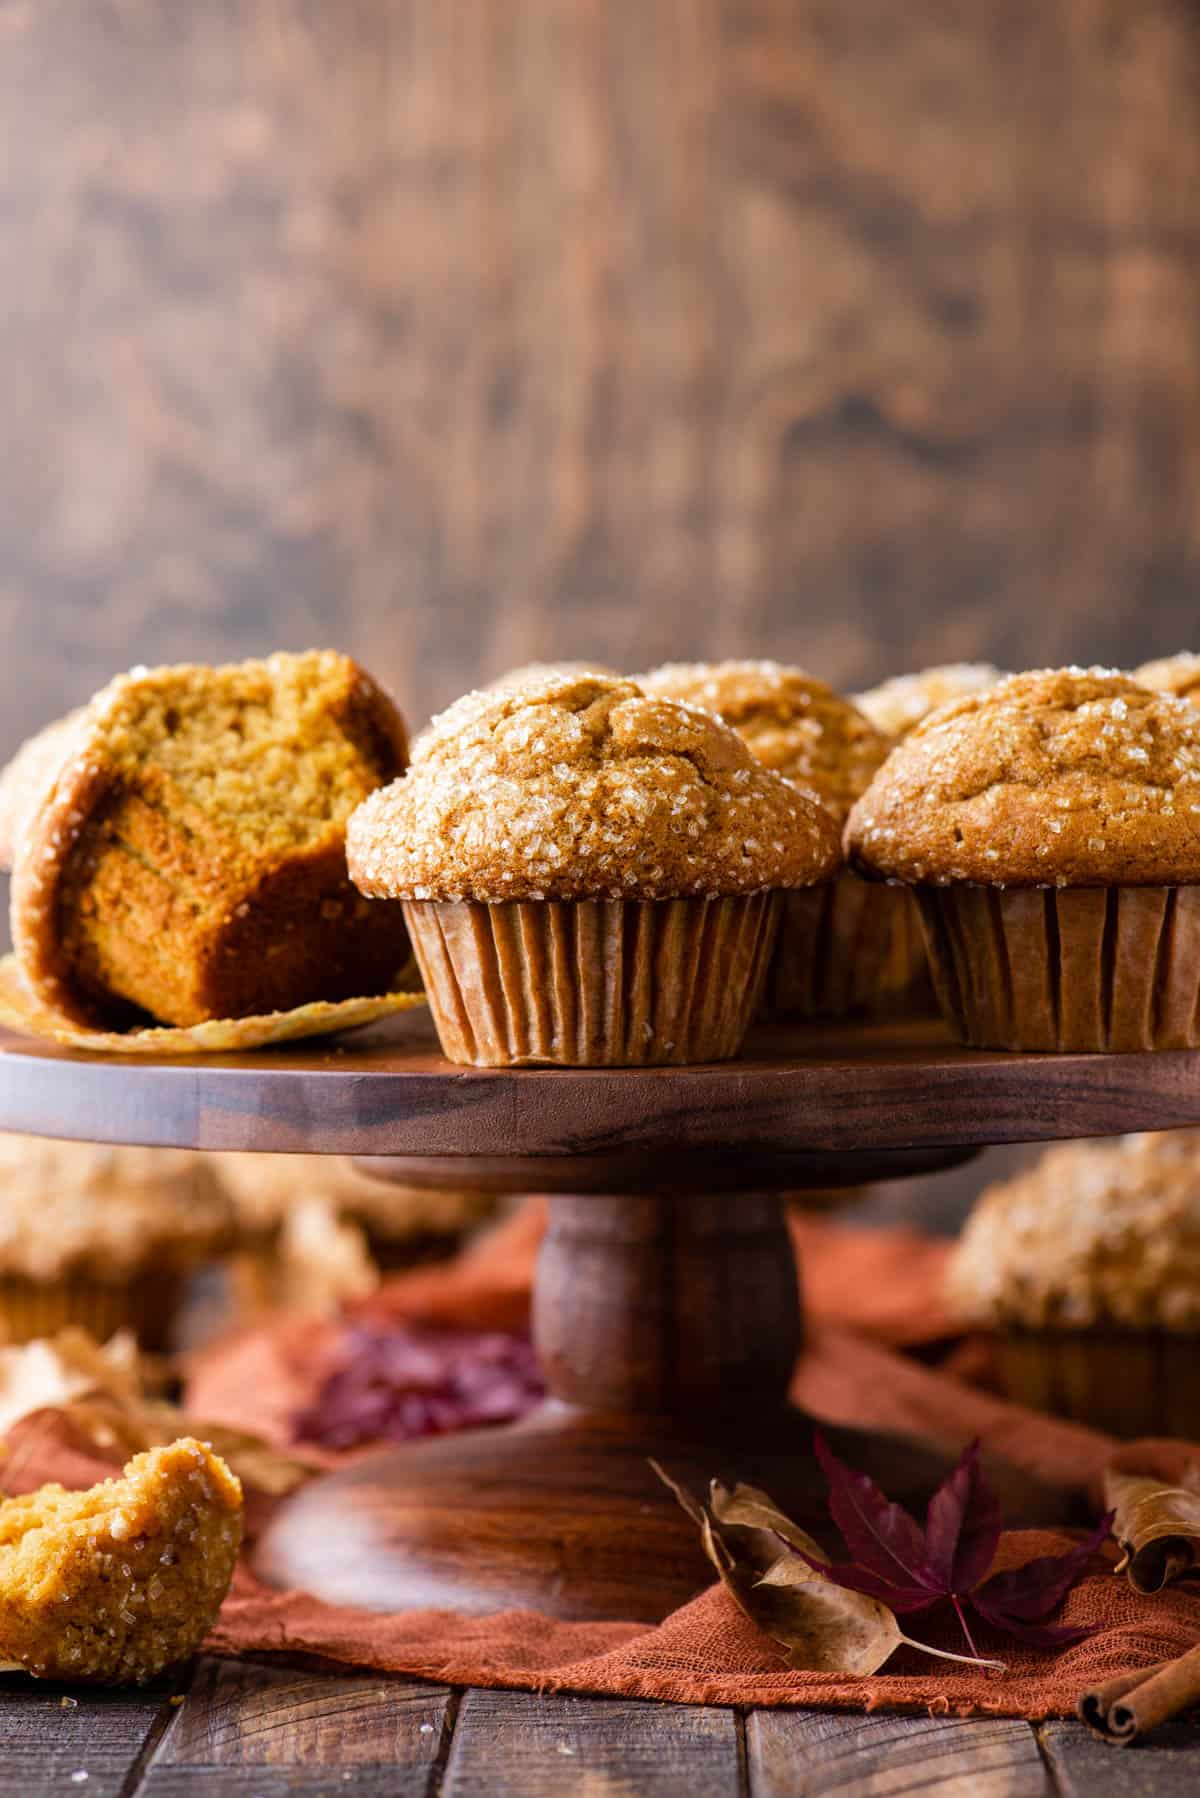 muffins displayed on wooden cake stand